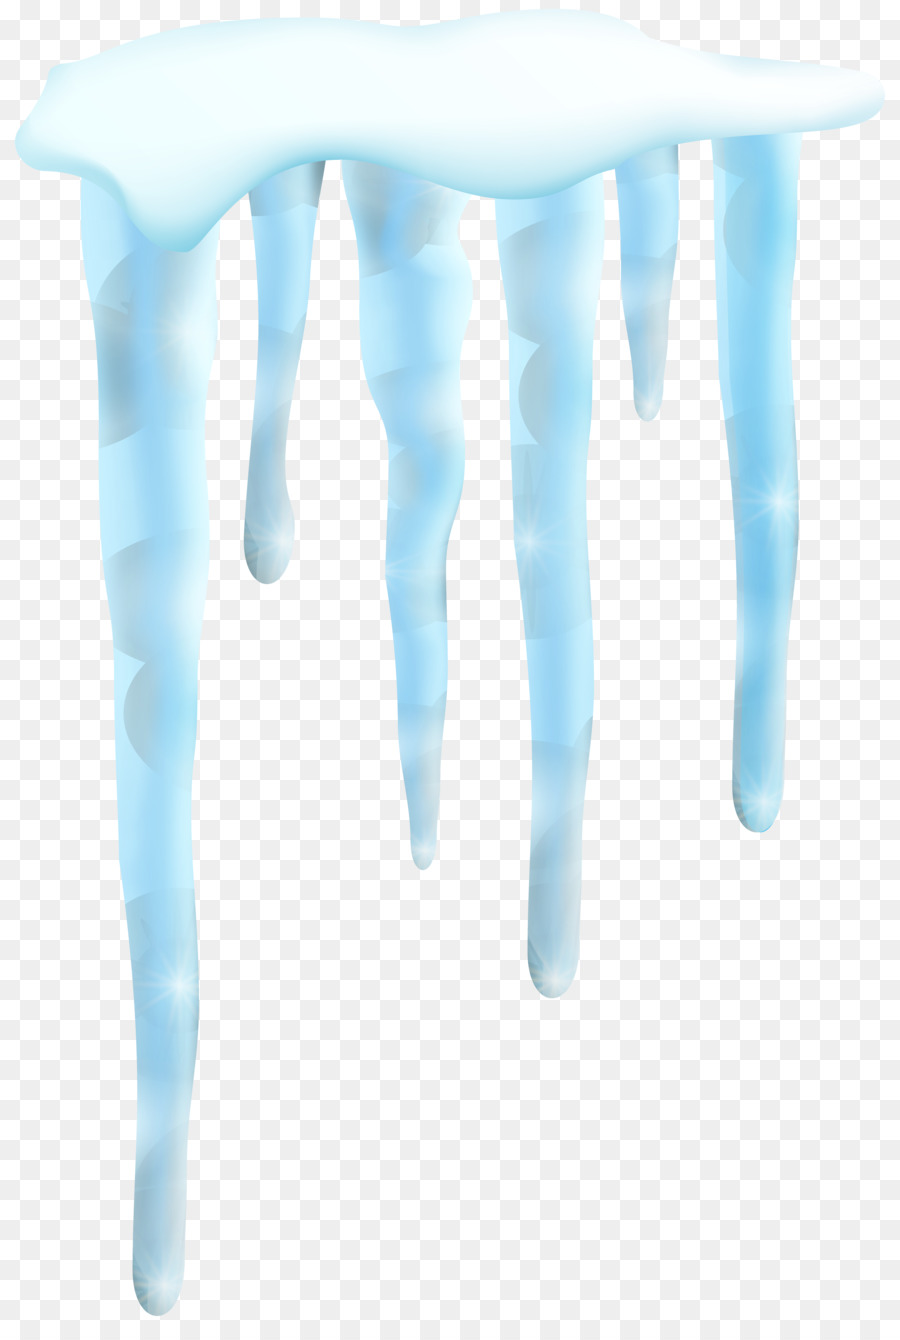 icicle clipart christmas